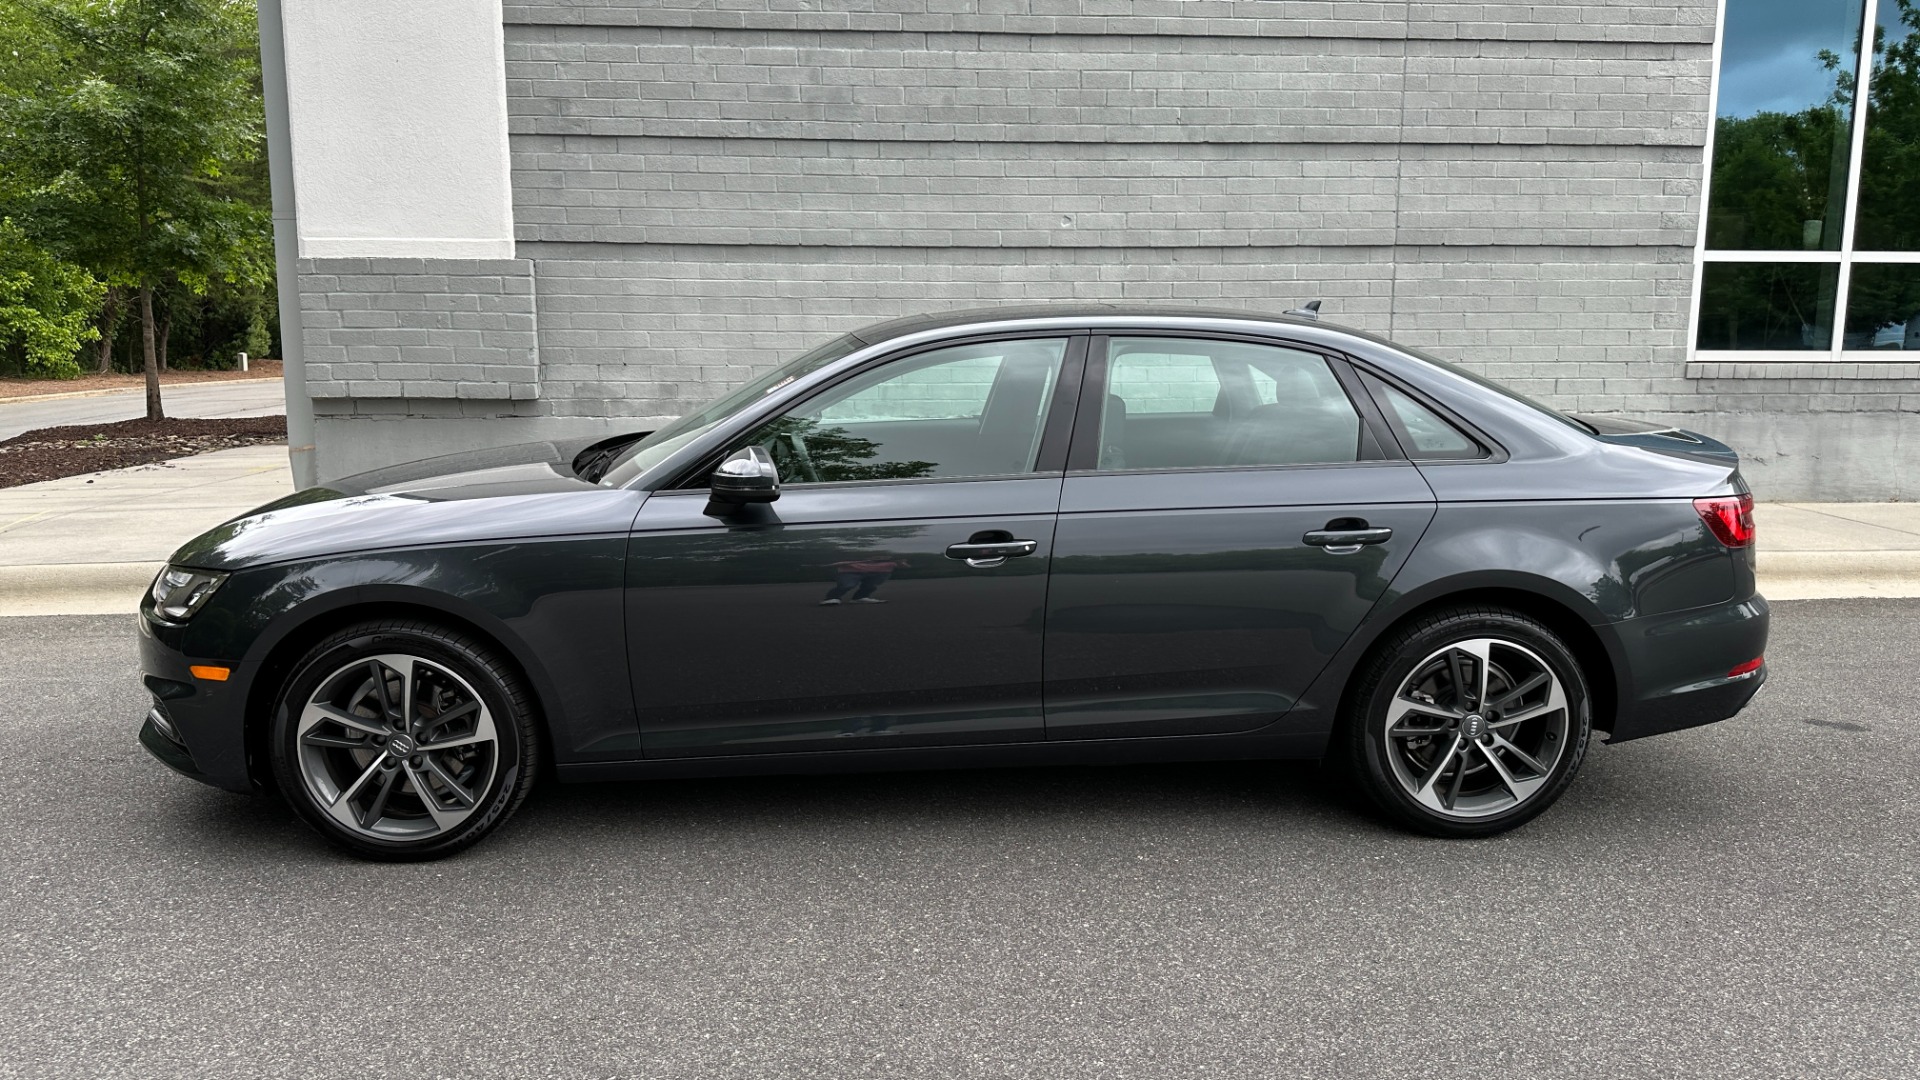 Used 2019 Audi A4 PREMIUM / AUDI BEAM RINGS / AUDI GUARD / LEATHER for sale $28,250 at Formula Imports in Charlotte NC 28227 3